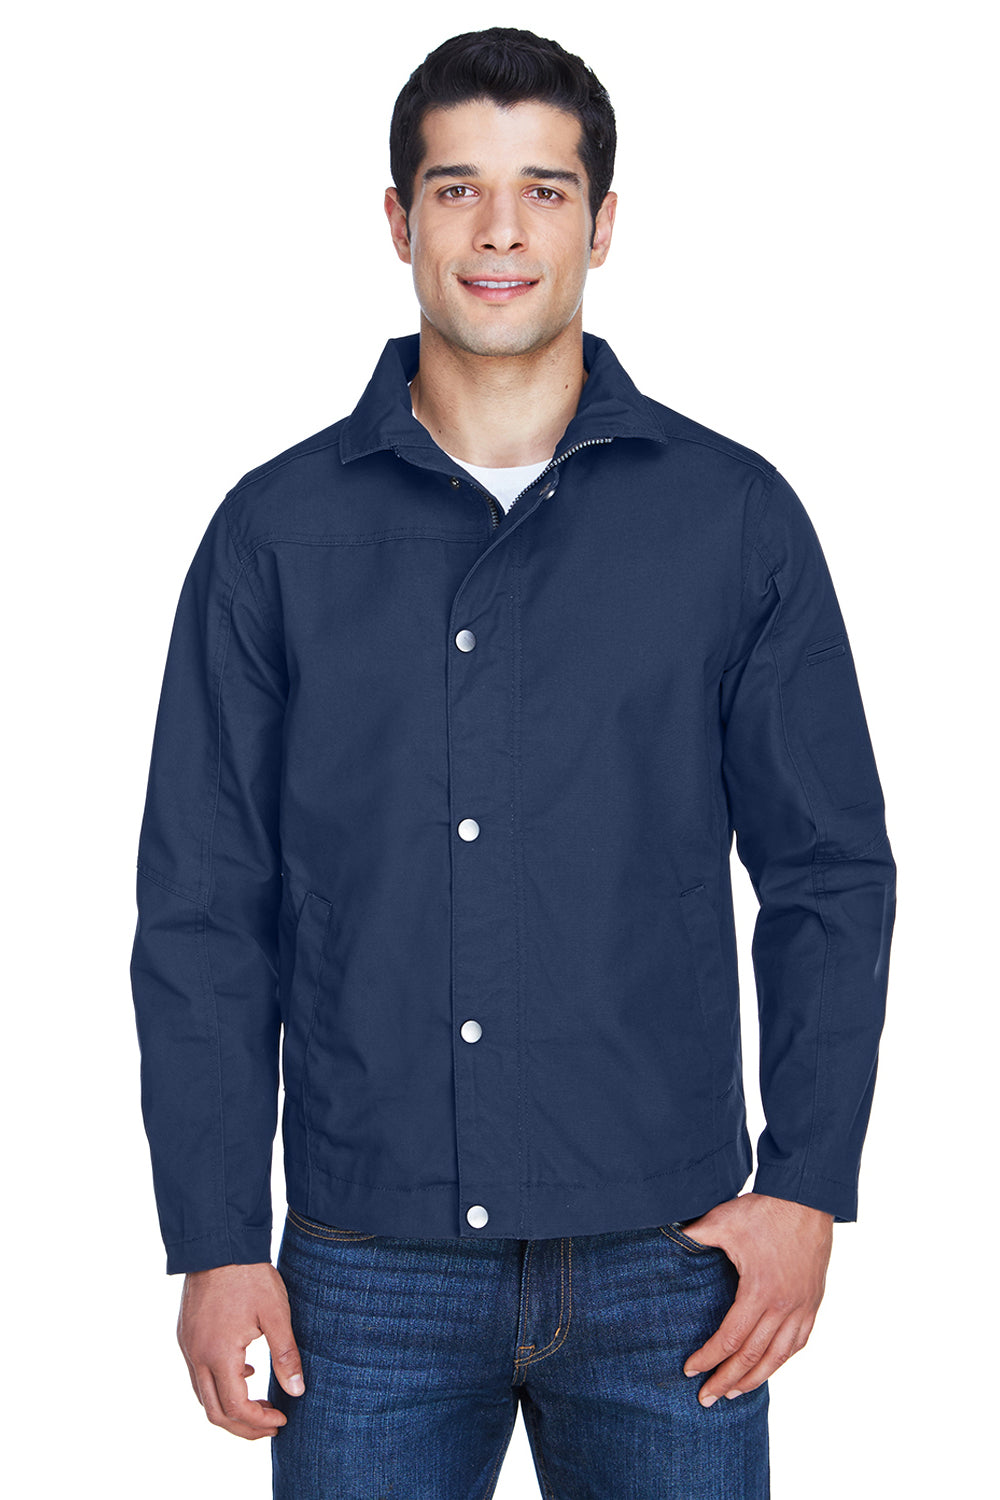 Harriton M705 Mens Auxiliary Water Resistant Canvas Full Zip Jacket Navy Blue Front